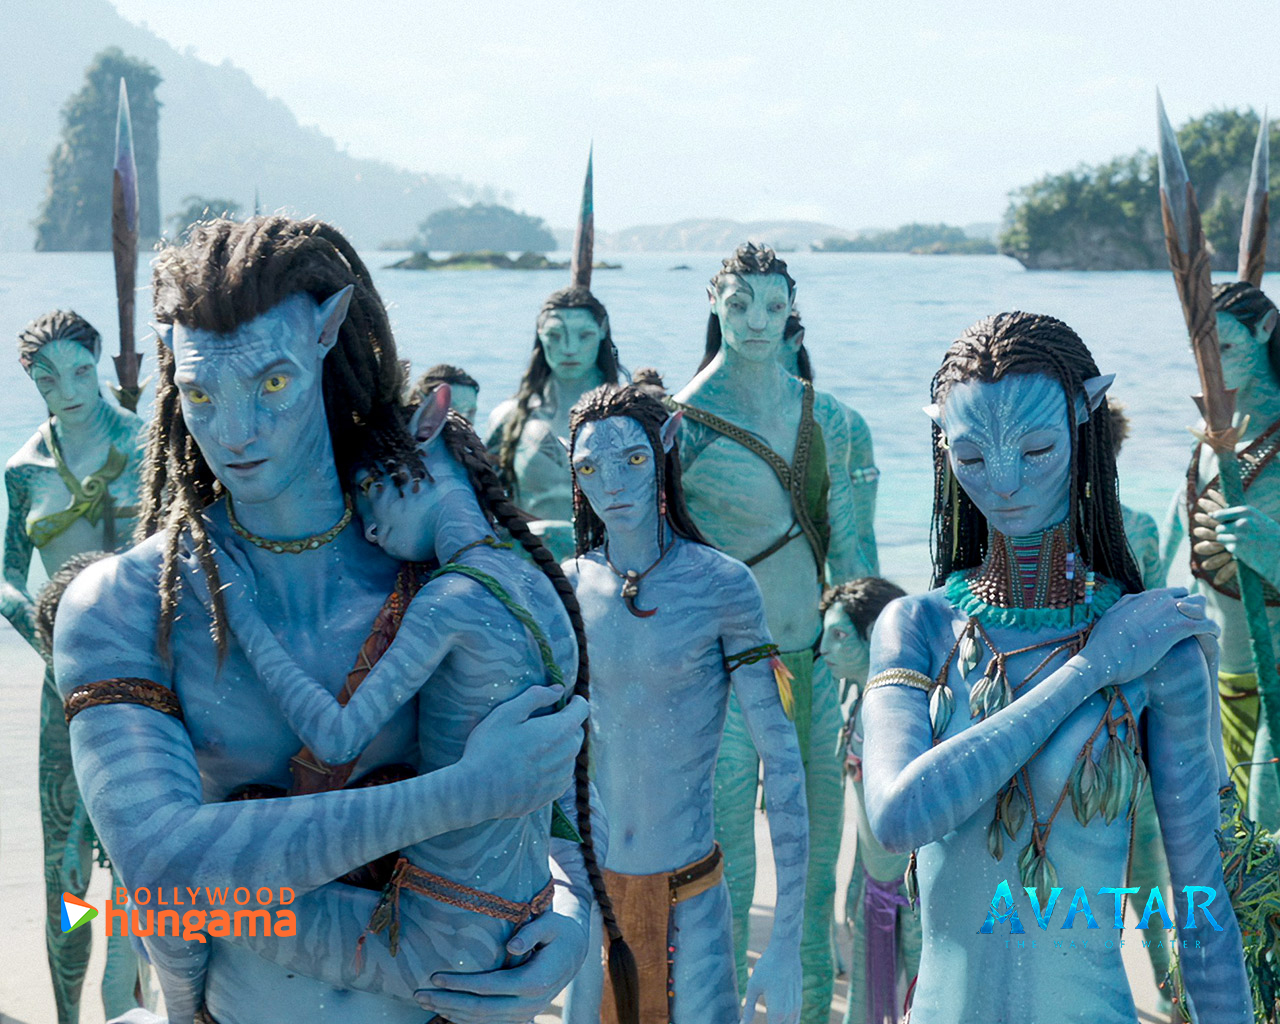 Avatar: The Way of Water (English) 2022 Wallpapers | Avatar: The Way of  Water (English) 2022 HD Images | Photos avatar-the-way-of-water-english-2-5  - Bollywood Hungama